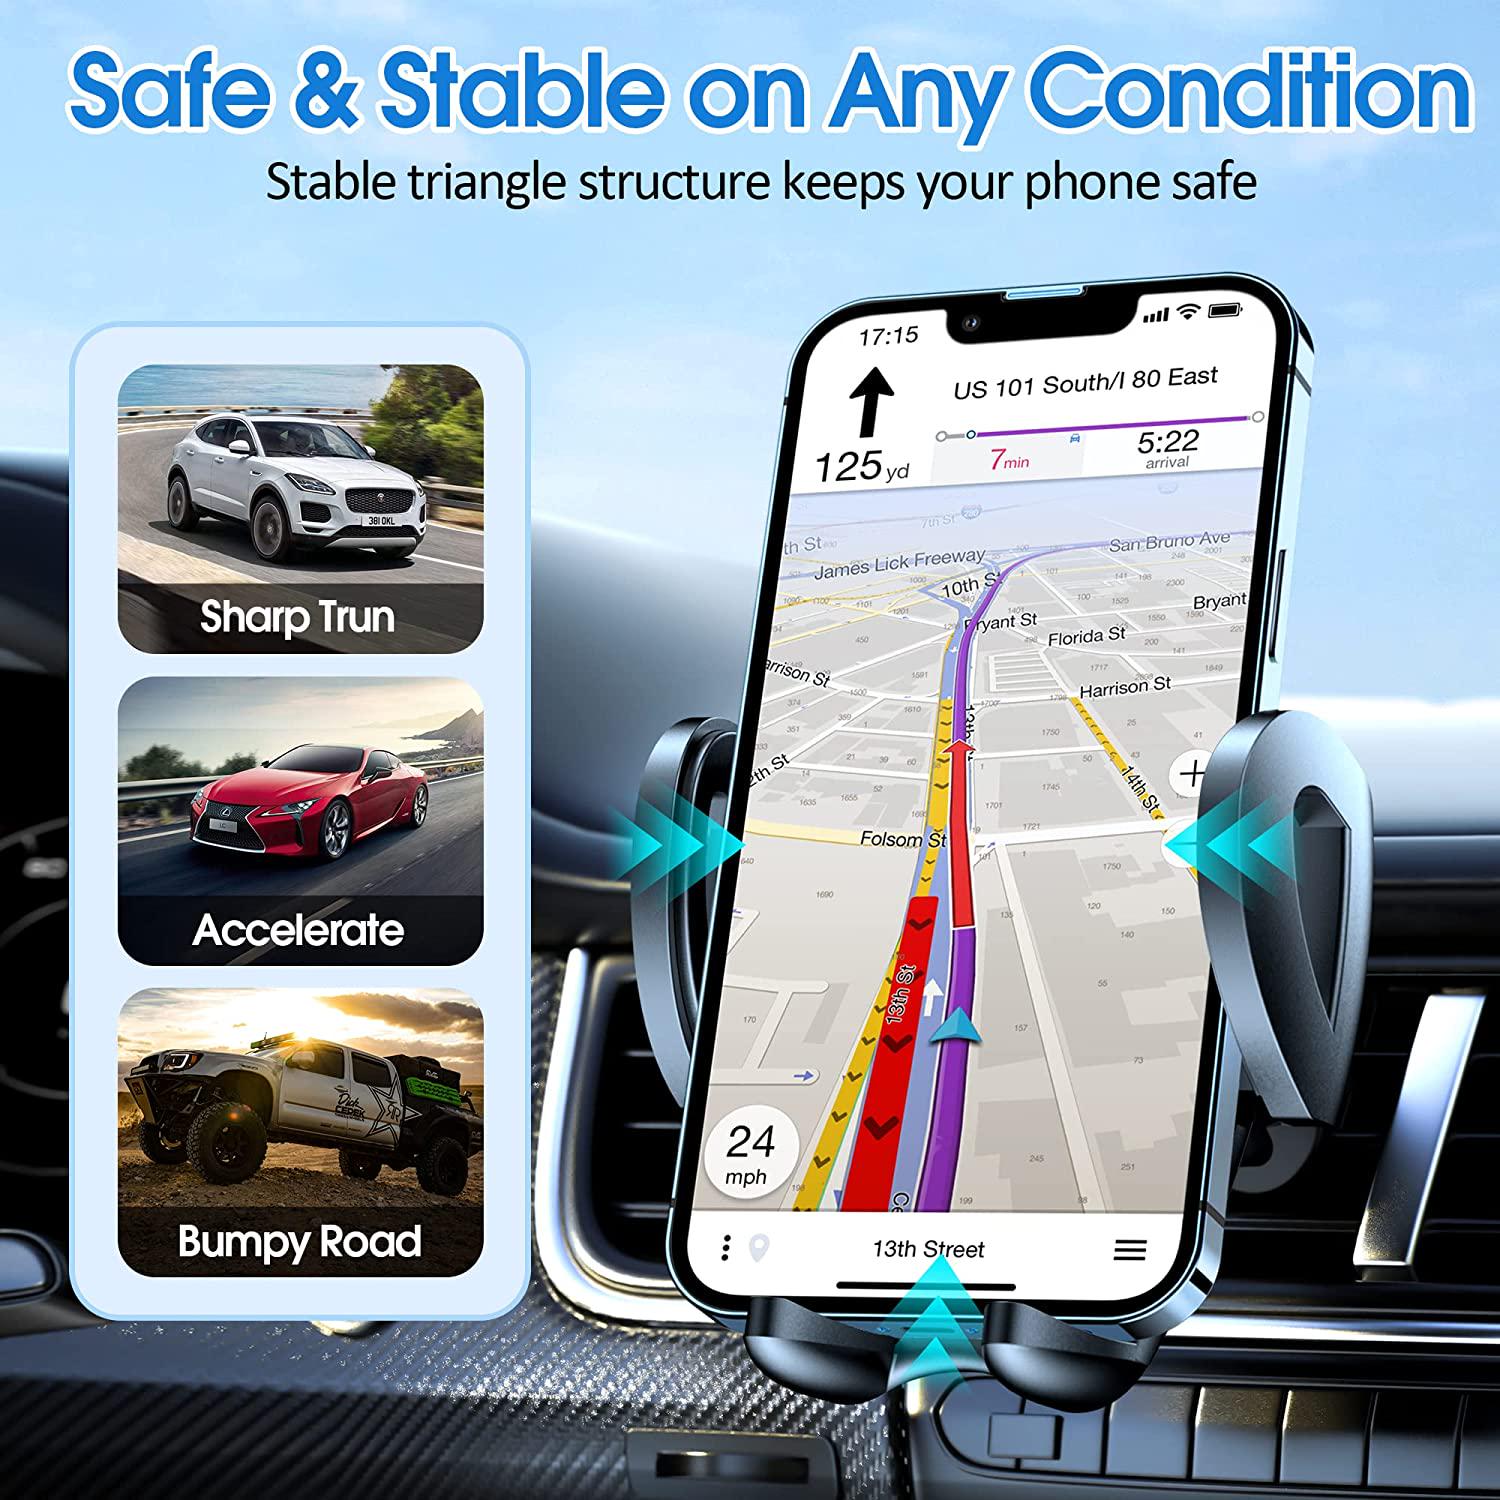 Migeec, Migeec Phone Mount for Car Fit for Big Phones Thin Case Friendly Car Phone Holder Air Vent Car Mount Hands Free Clamp Cradle Vehicle Compatible with iPhone Samsung